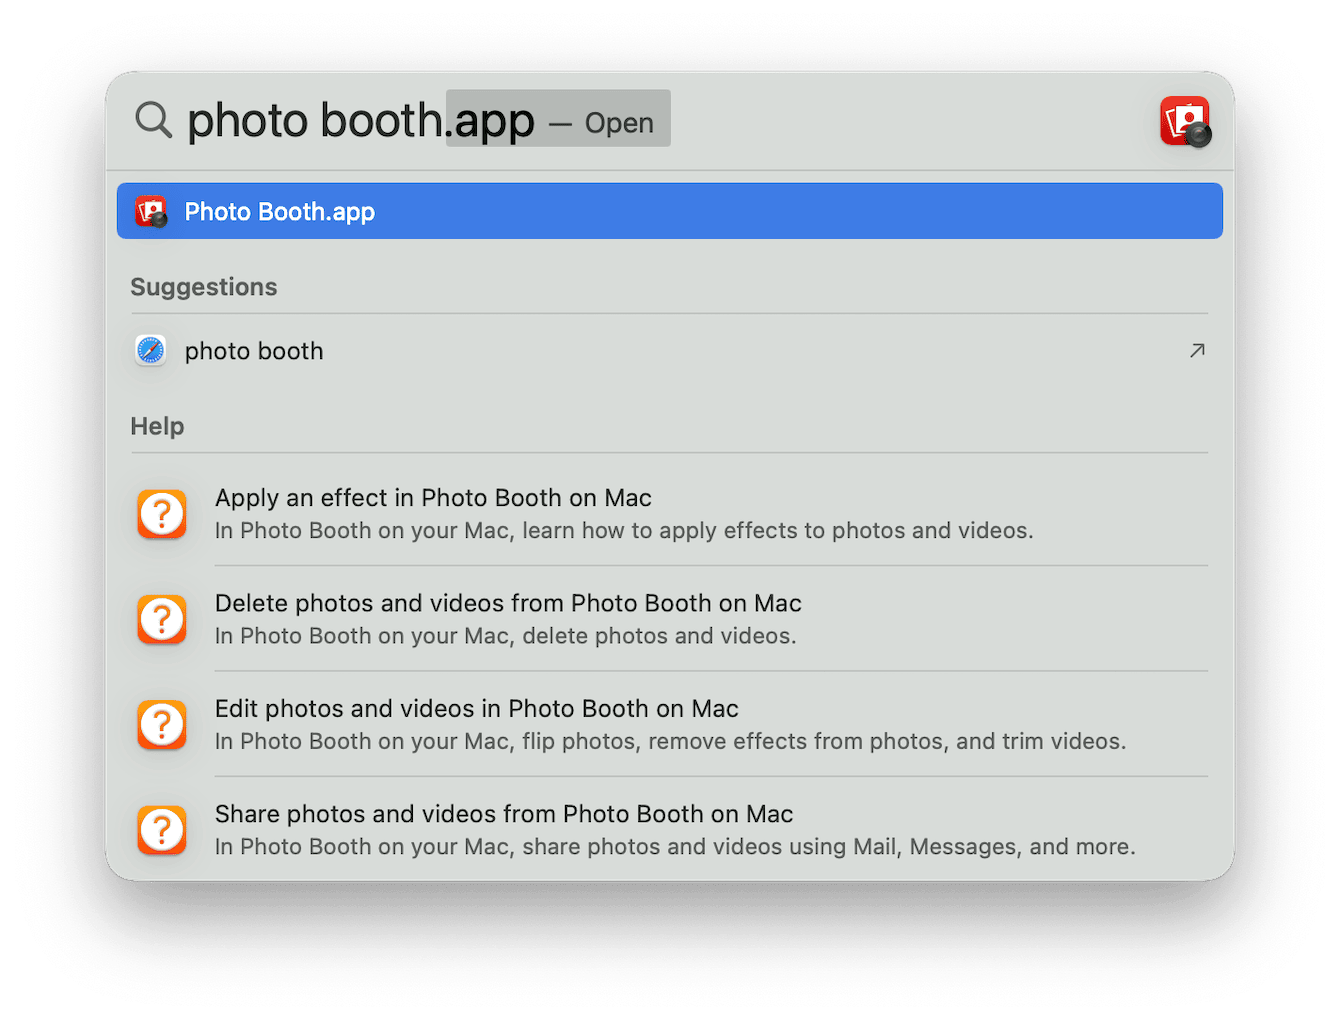 How to take a photo on MacBook with the Photo Booth app